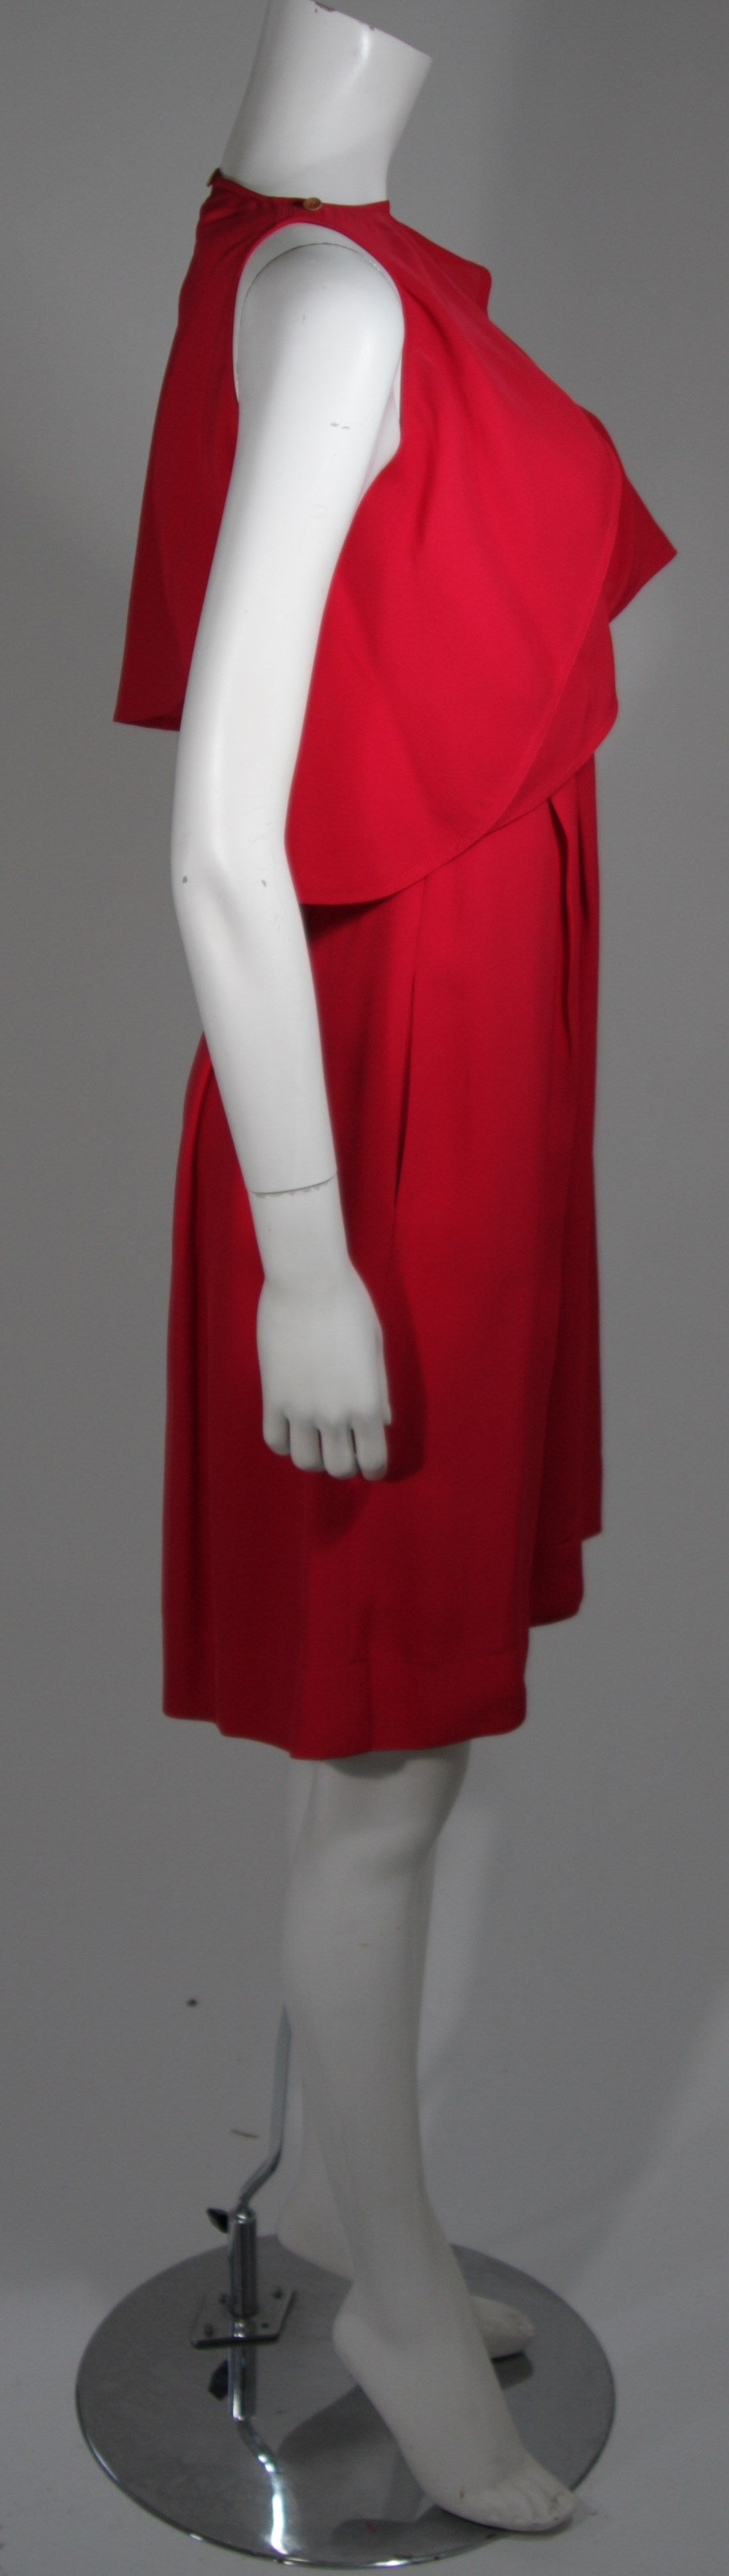 Women's Fendi Red Cocktail Dress with Caplet Attachment and Button Details Size 2 For Sale